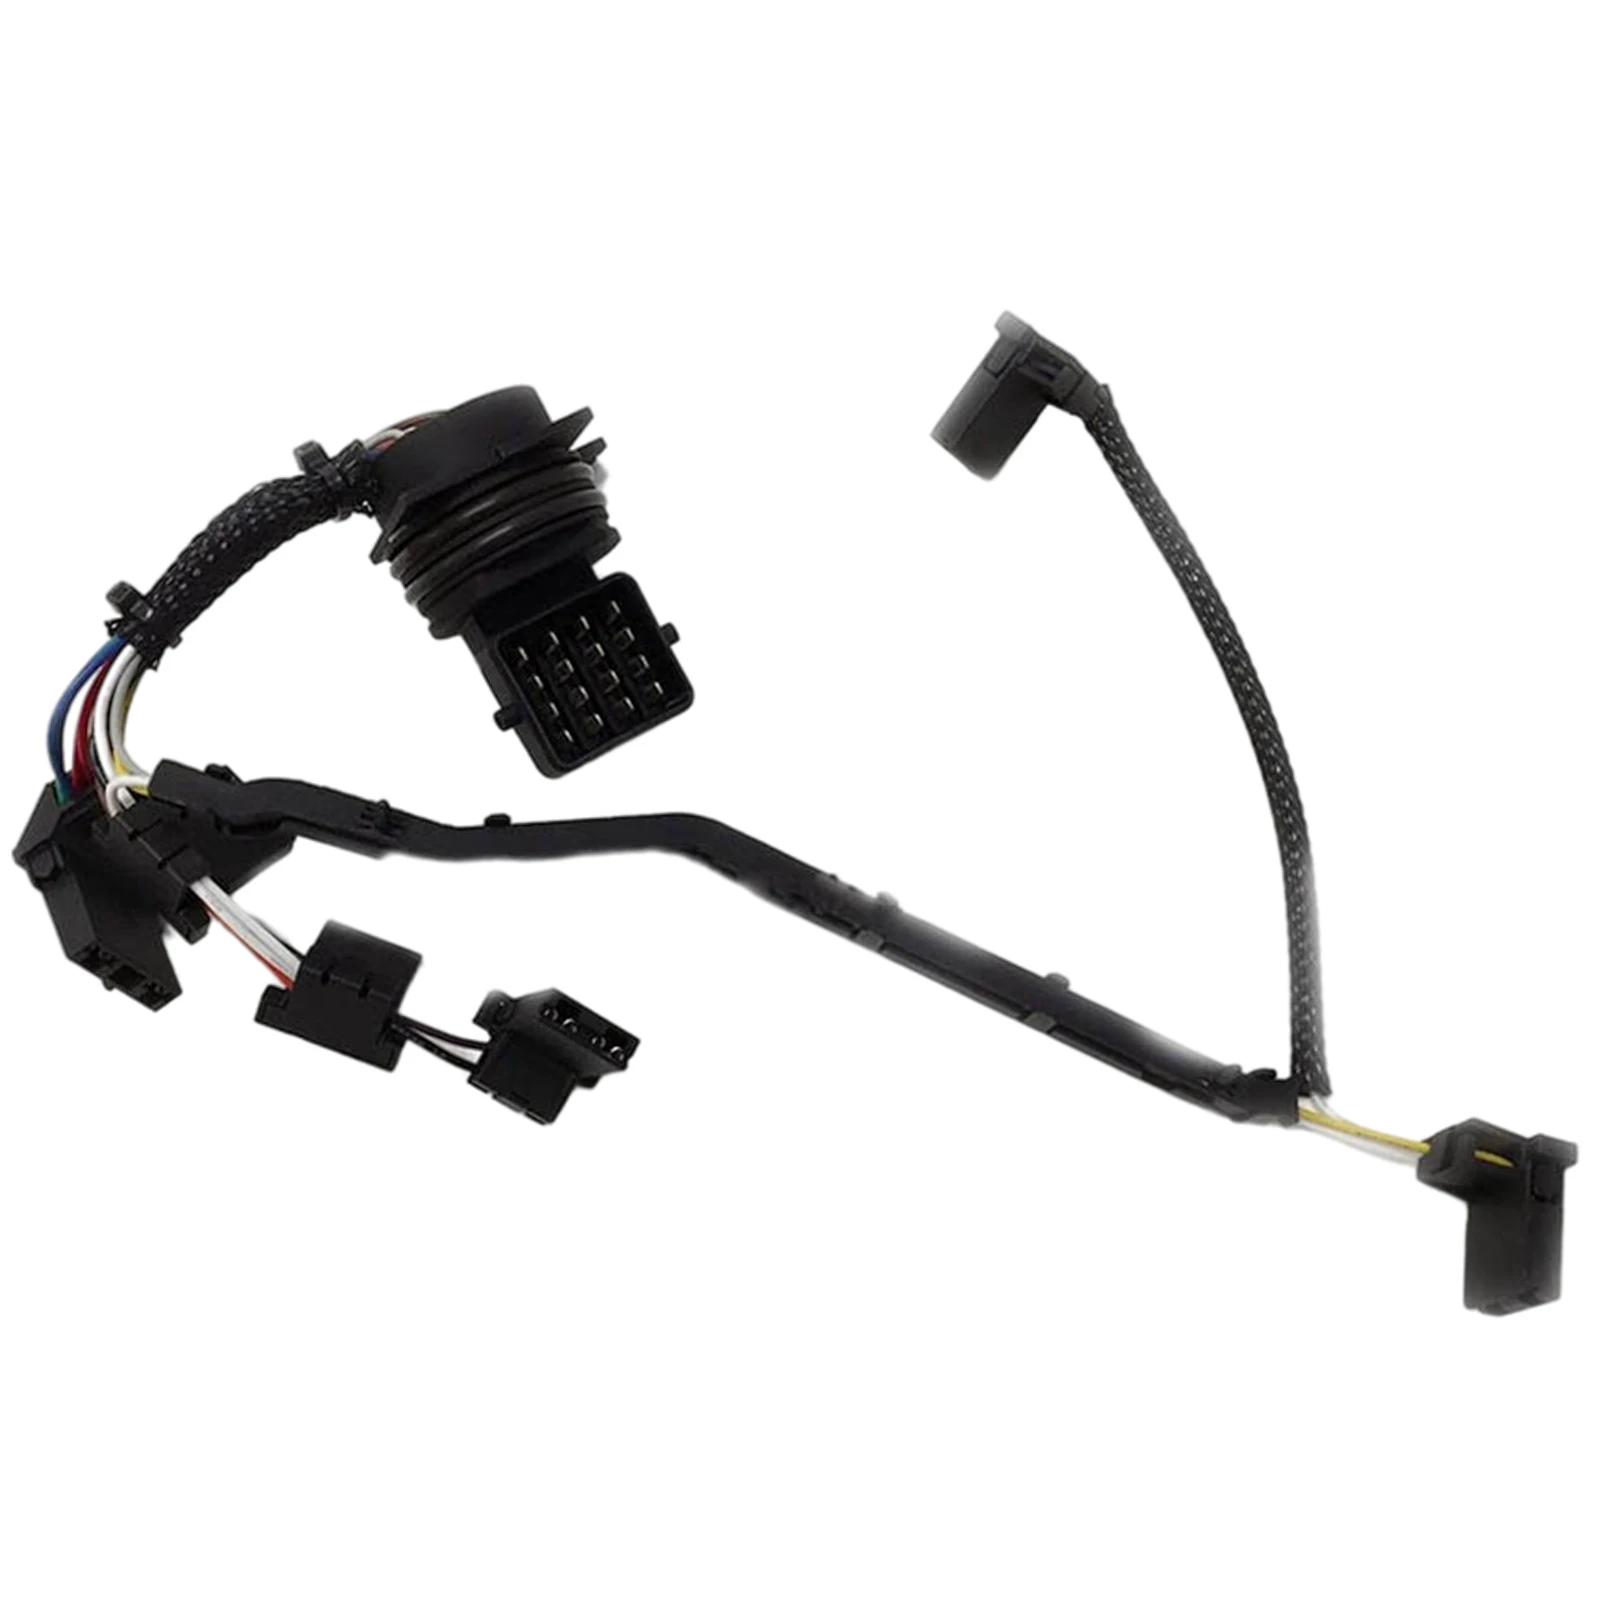 Transmission Harness Internal Replace Accessories Compatible Wiring Replacement Automatic Fit for 1995+  R44E 56986A 5R44E